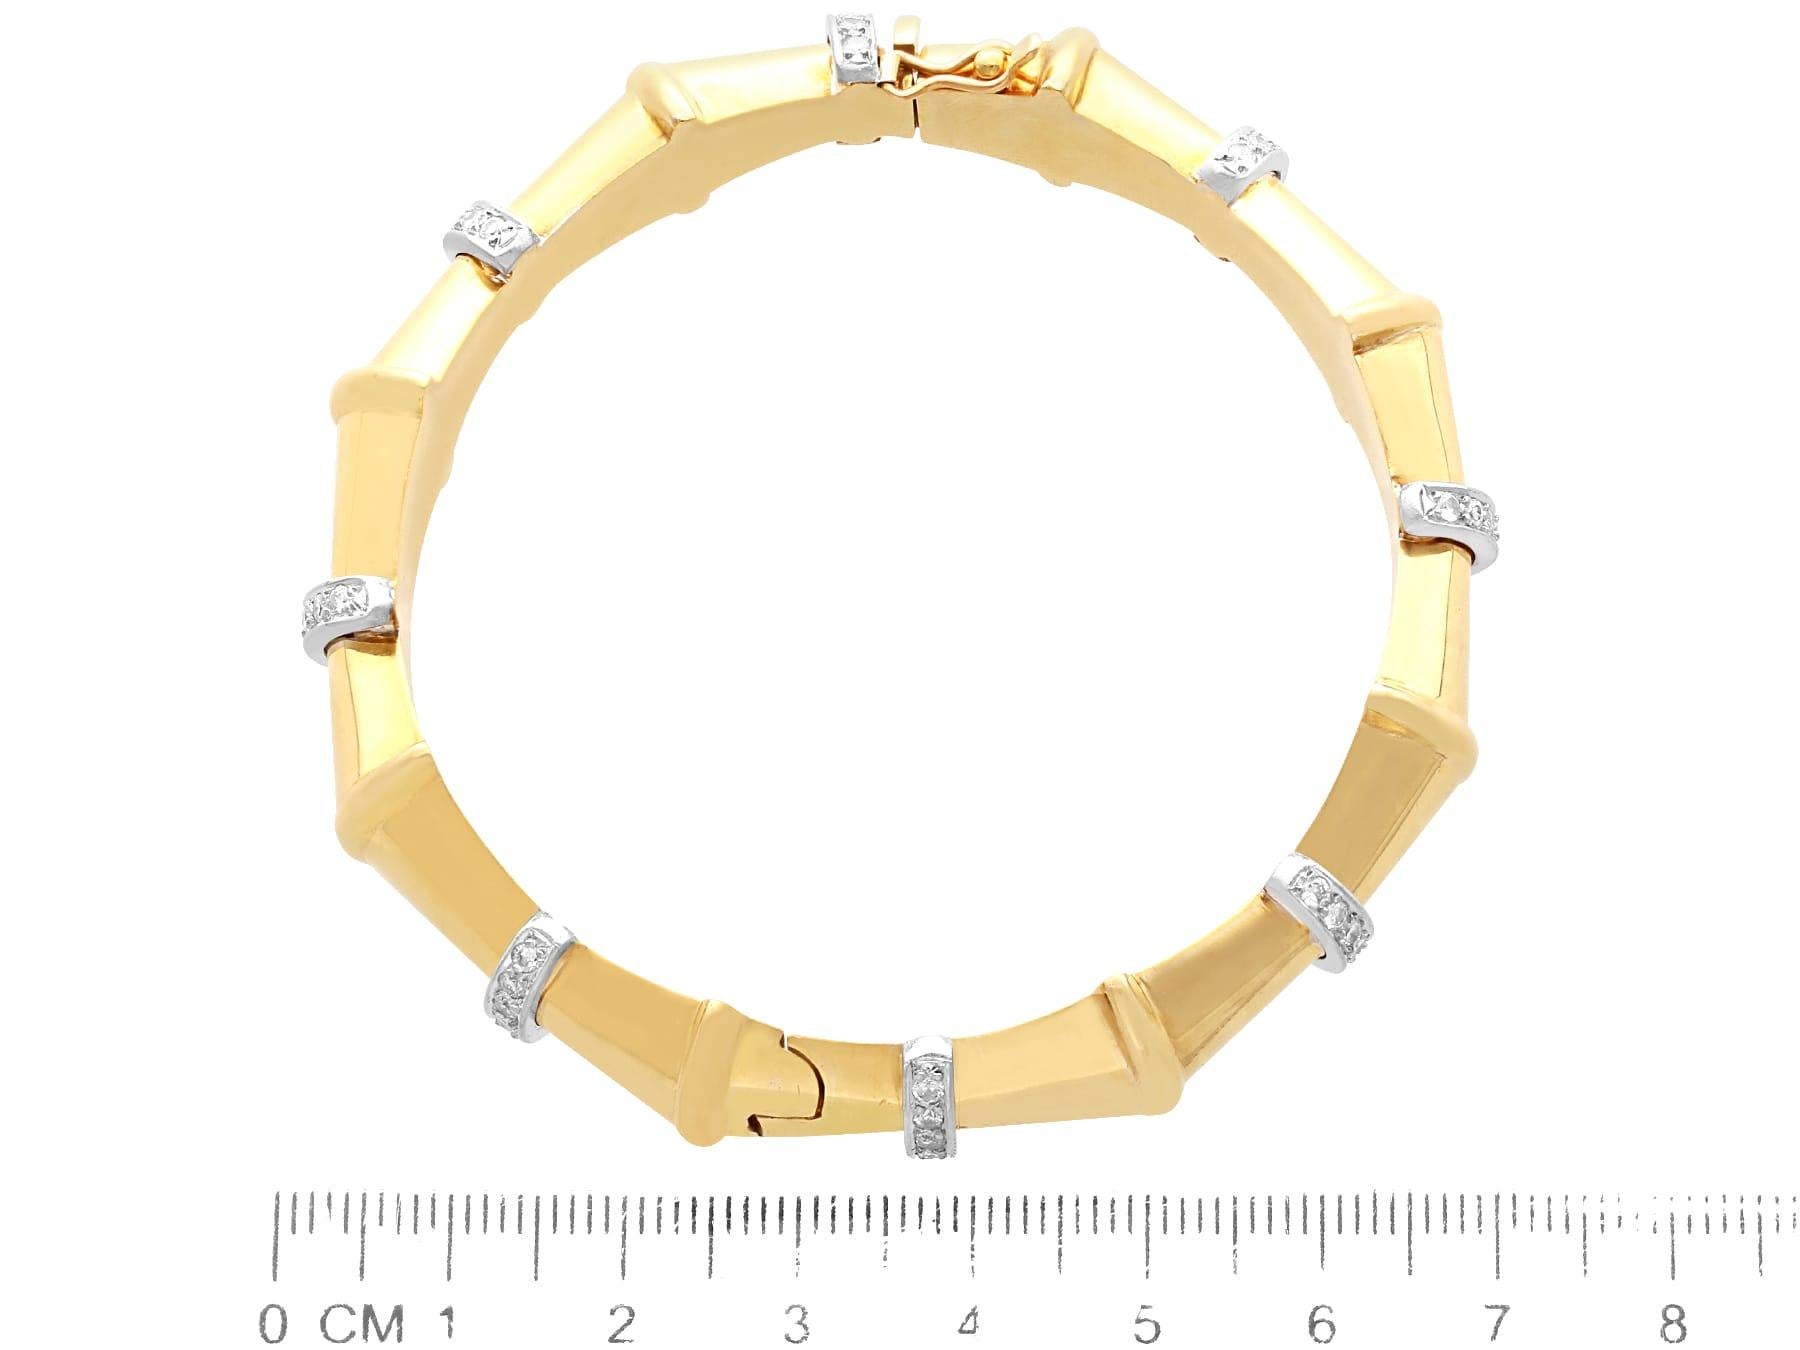 Antique 1.68 Carat Diamond and 18k Yellow Gold Art Deco Bangle For Sale 3